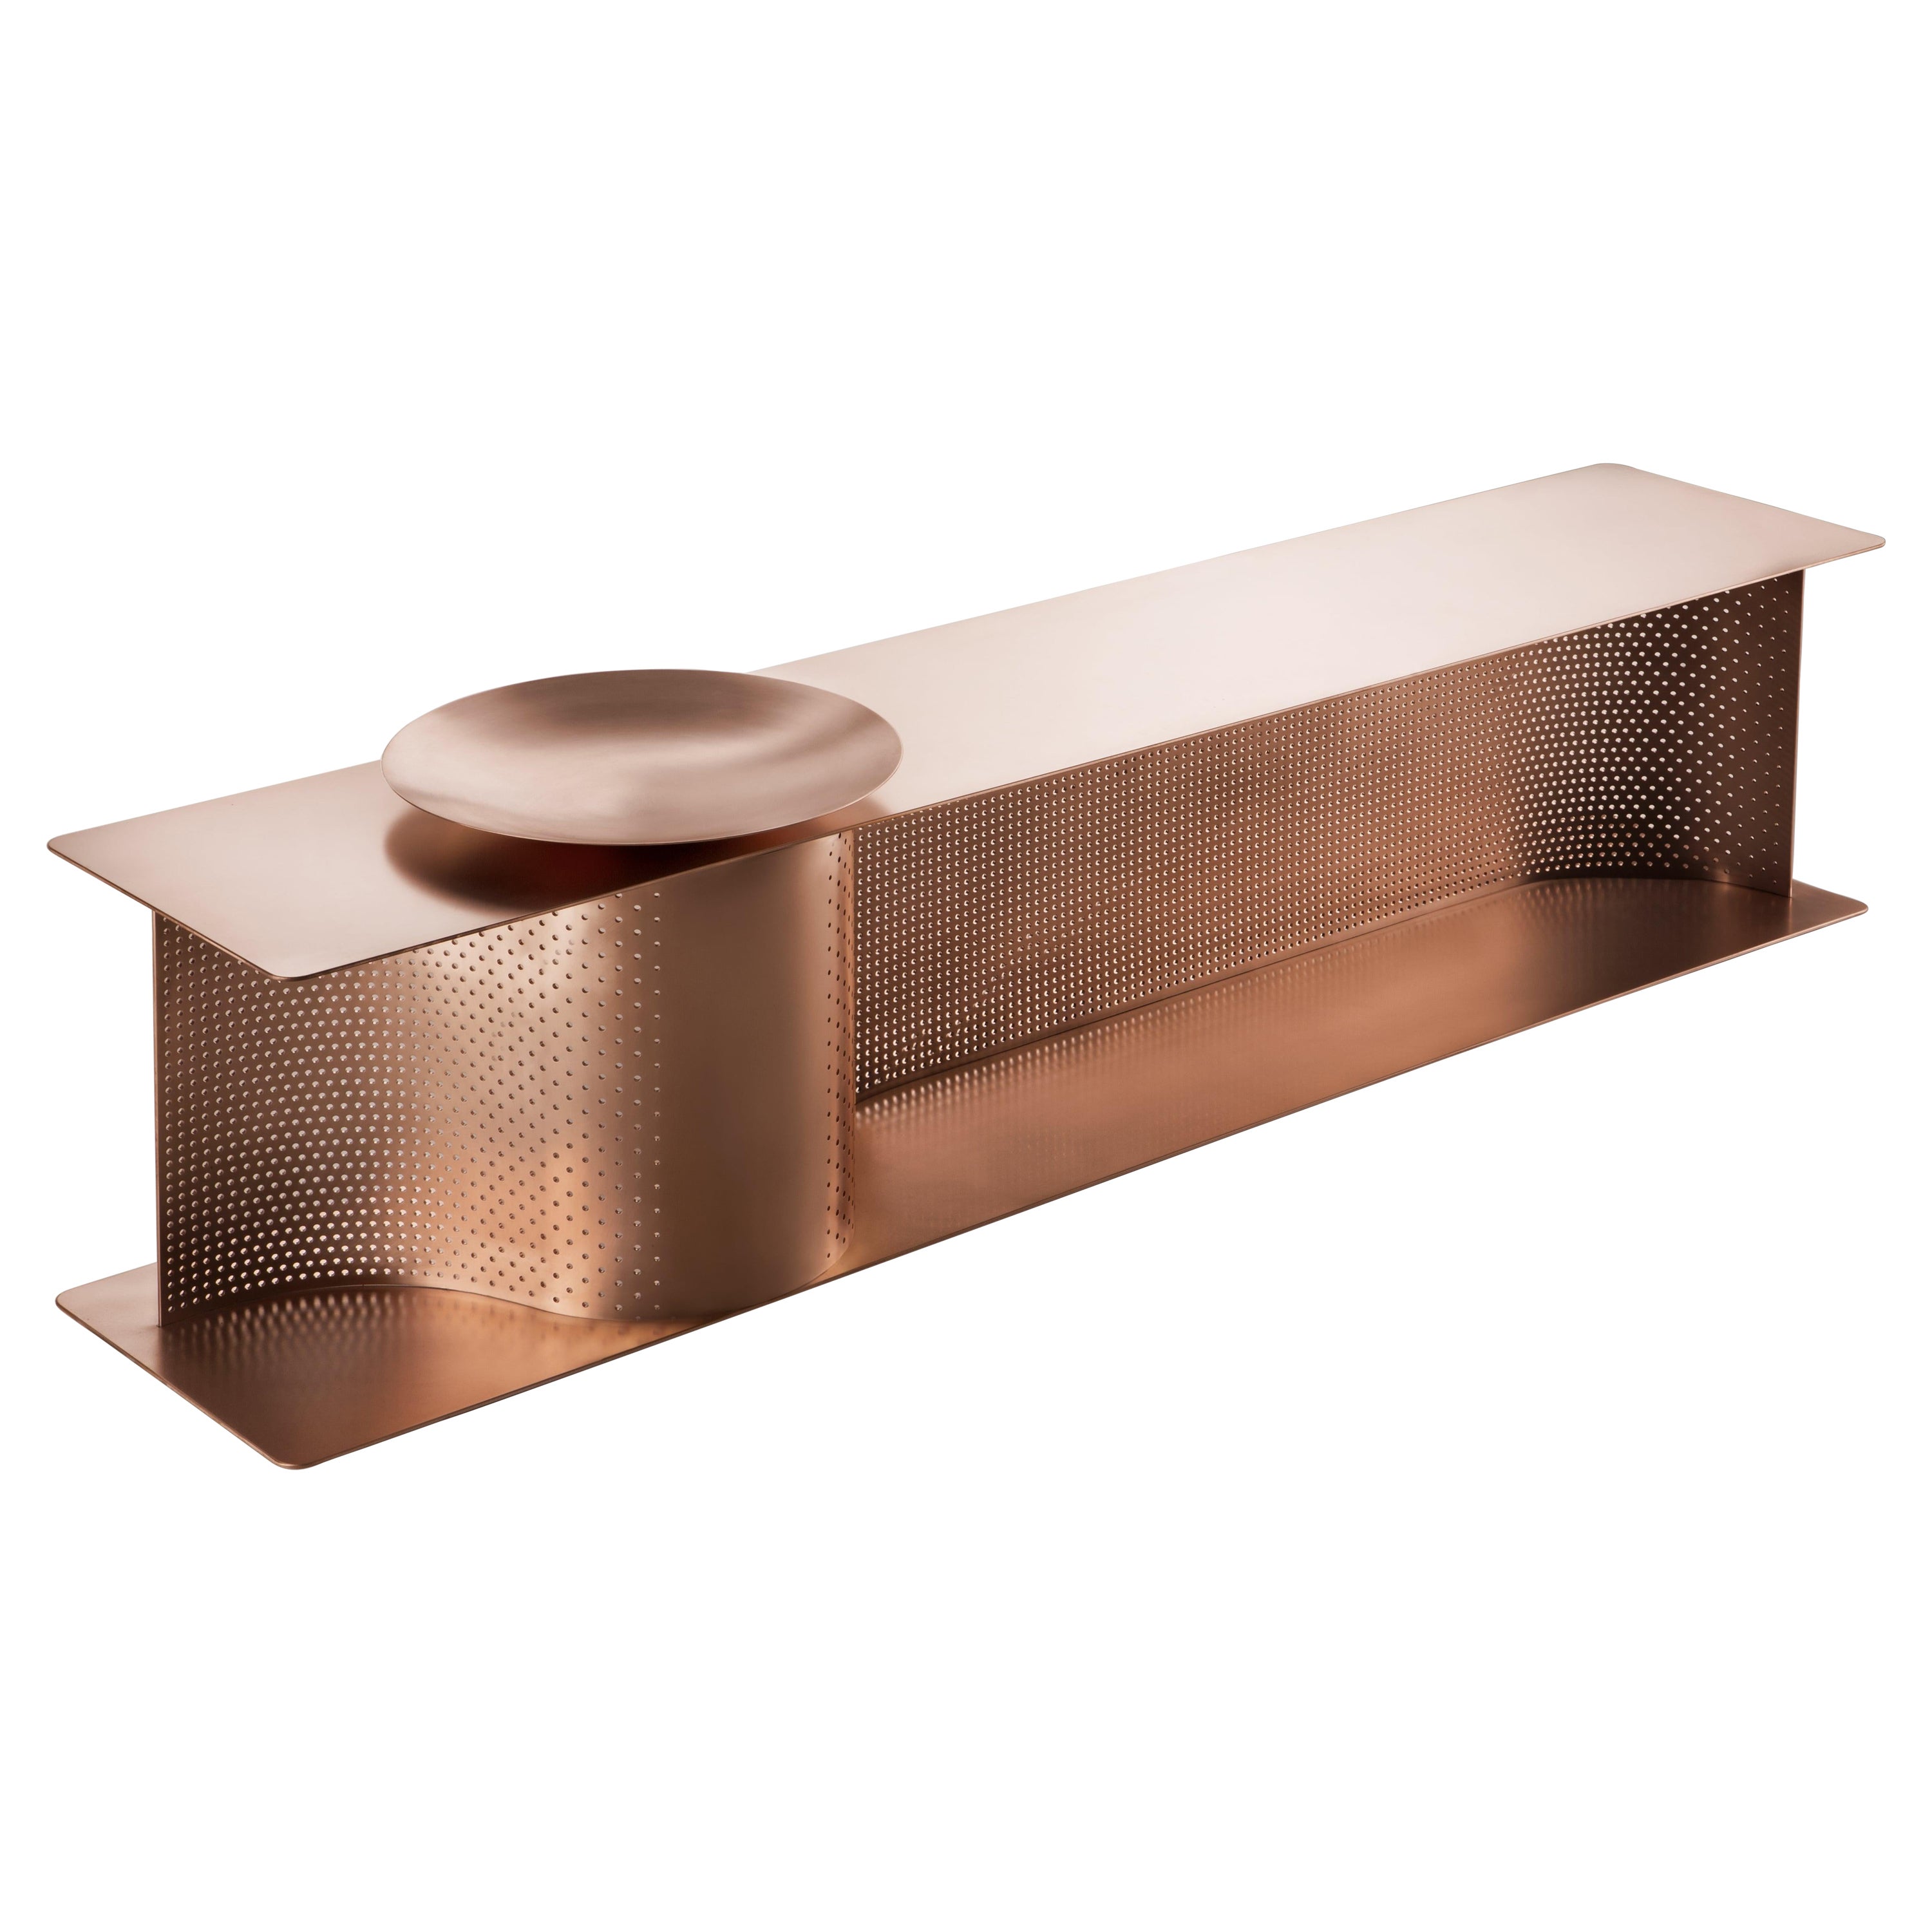 DeCastelli Wave Bench in Natural Brushed Copper by Lanzavecchia + Wai For Sale